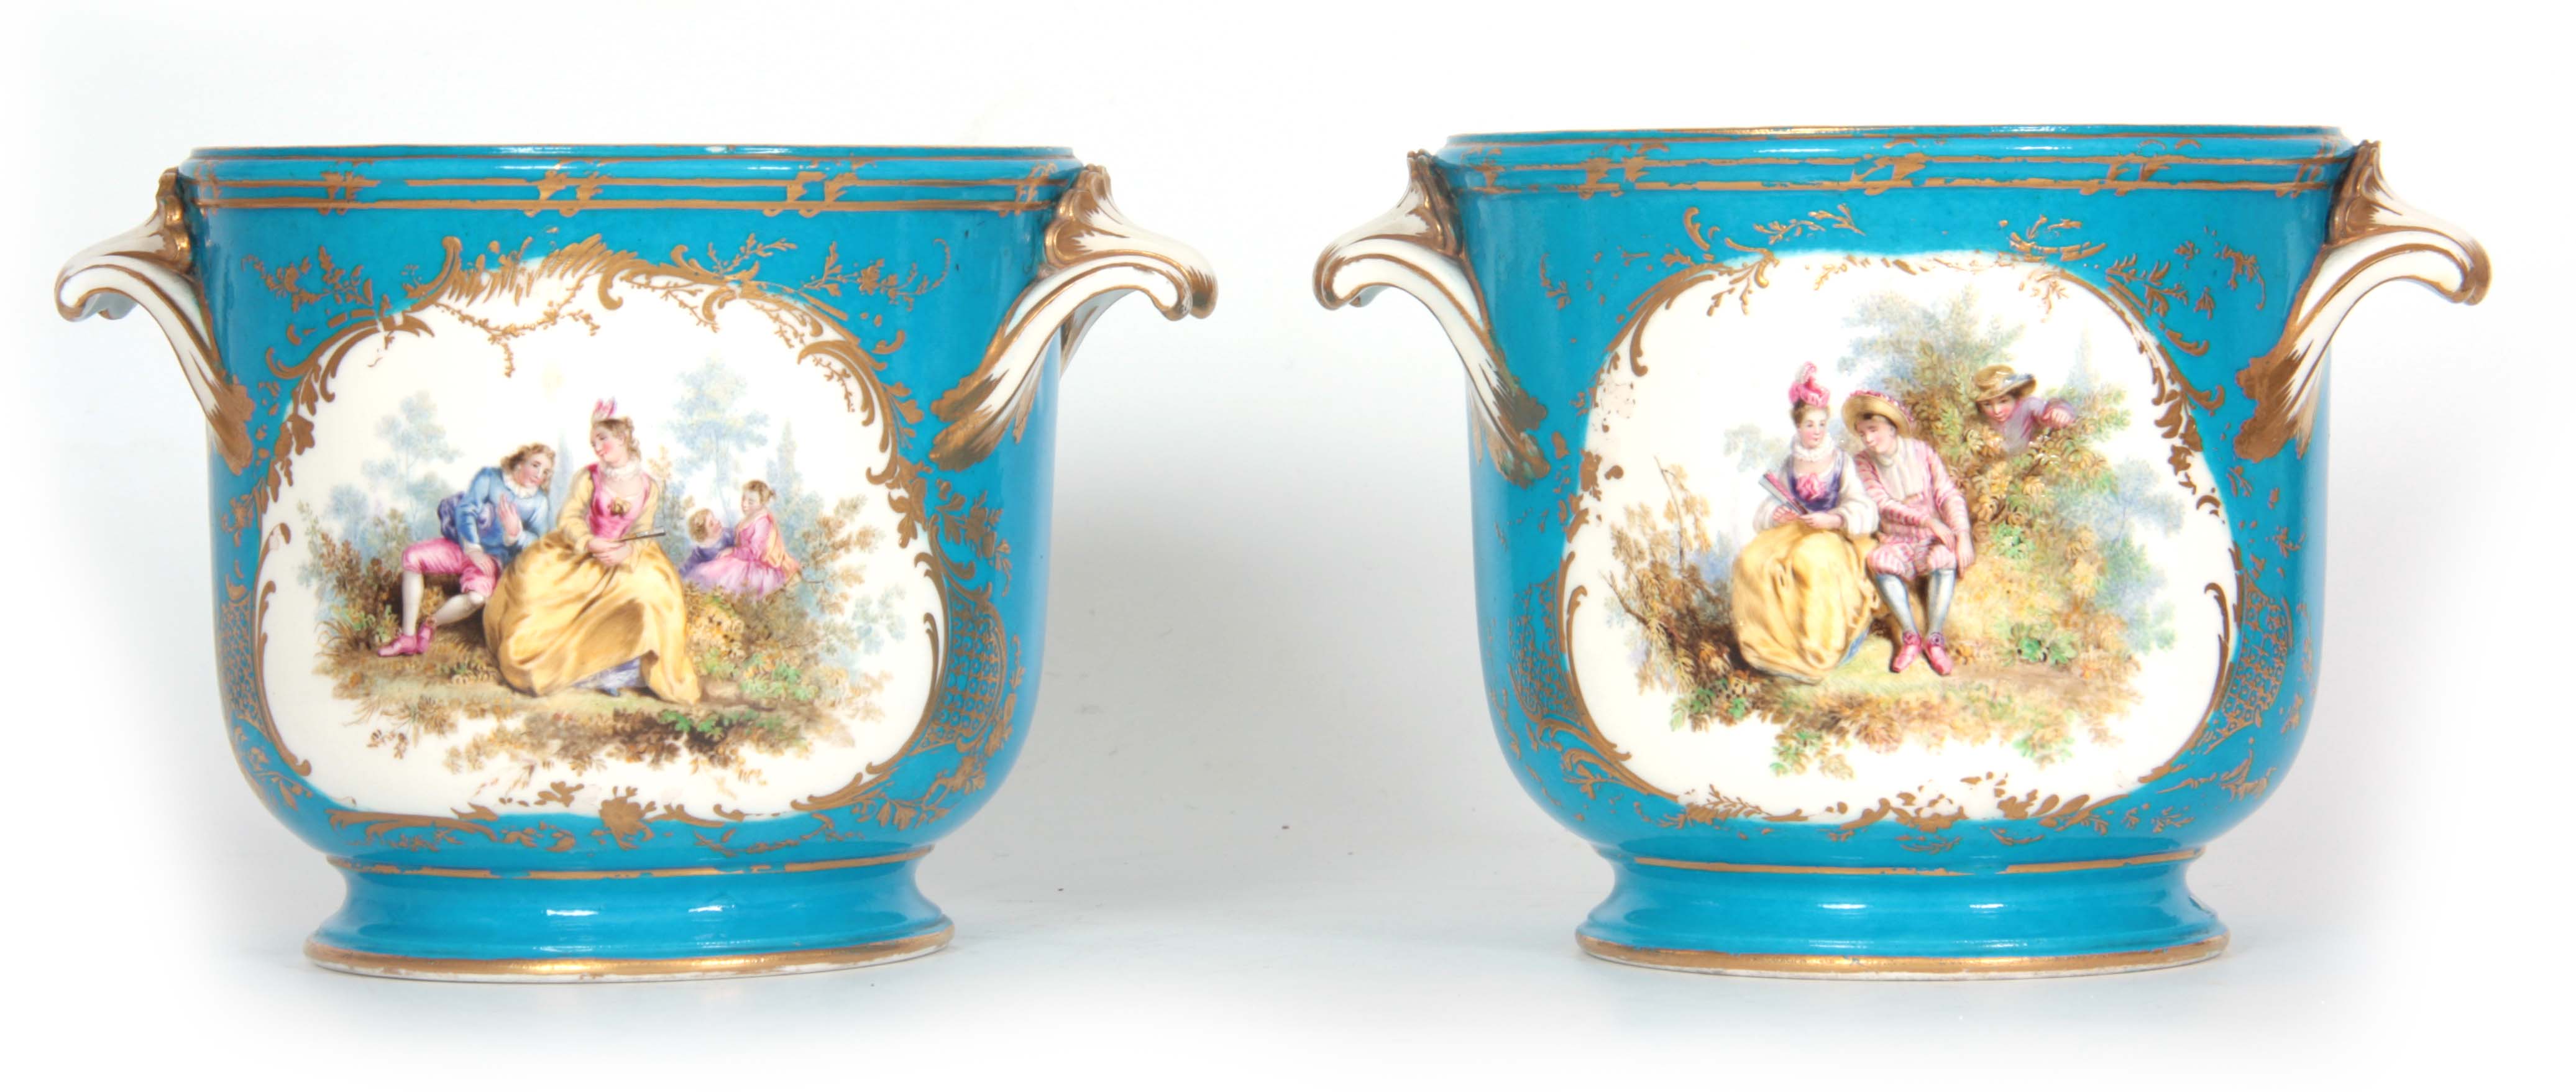 A PAIR OF 19TH CENTURY SEVRES PATTERN LARGE TWO-HANDLED JARDINIERES with gilt-edged leaf work